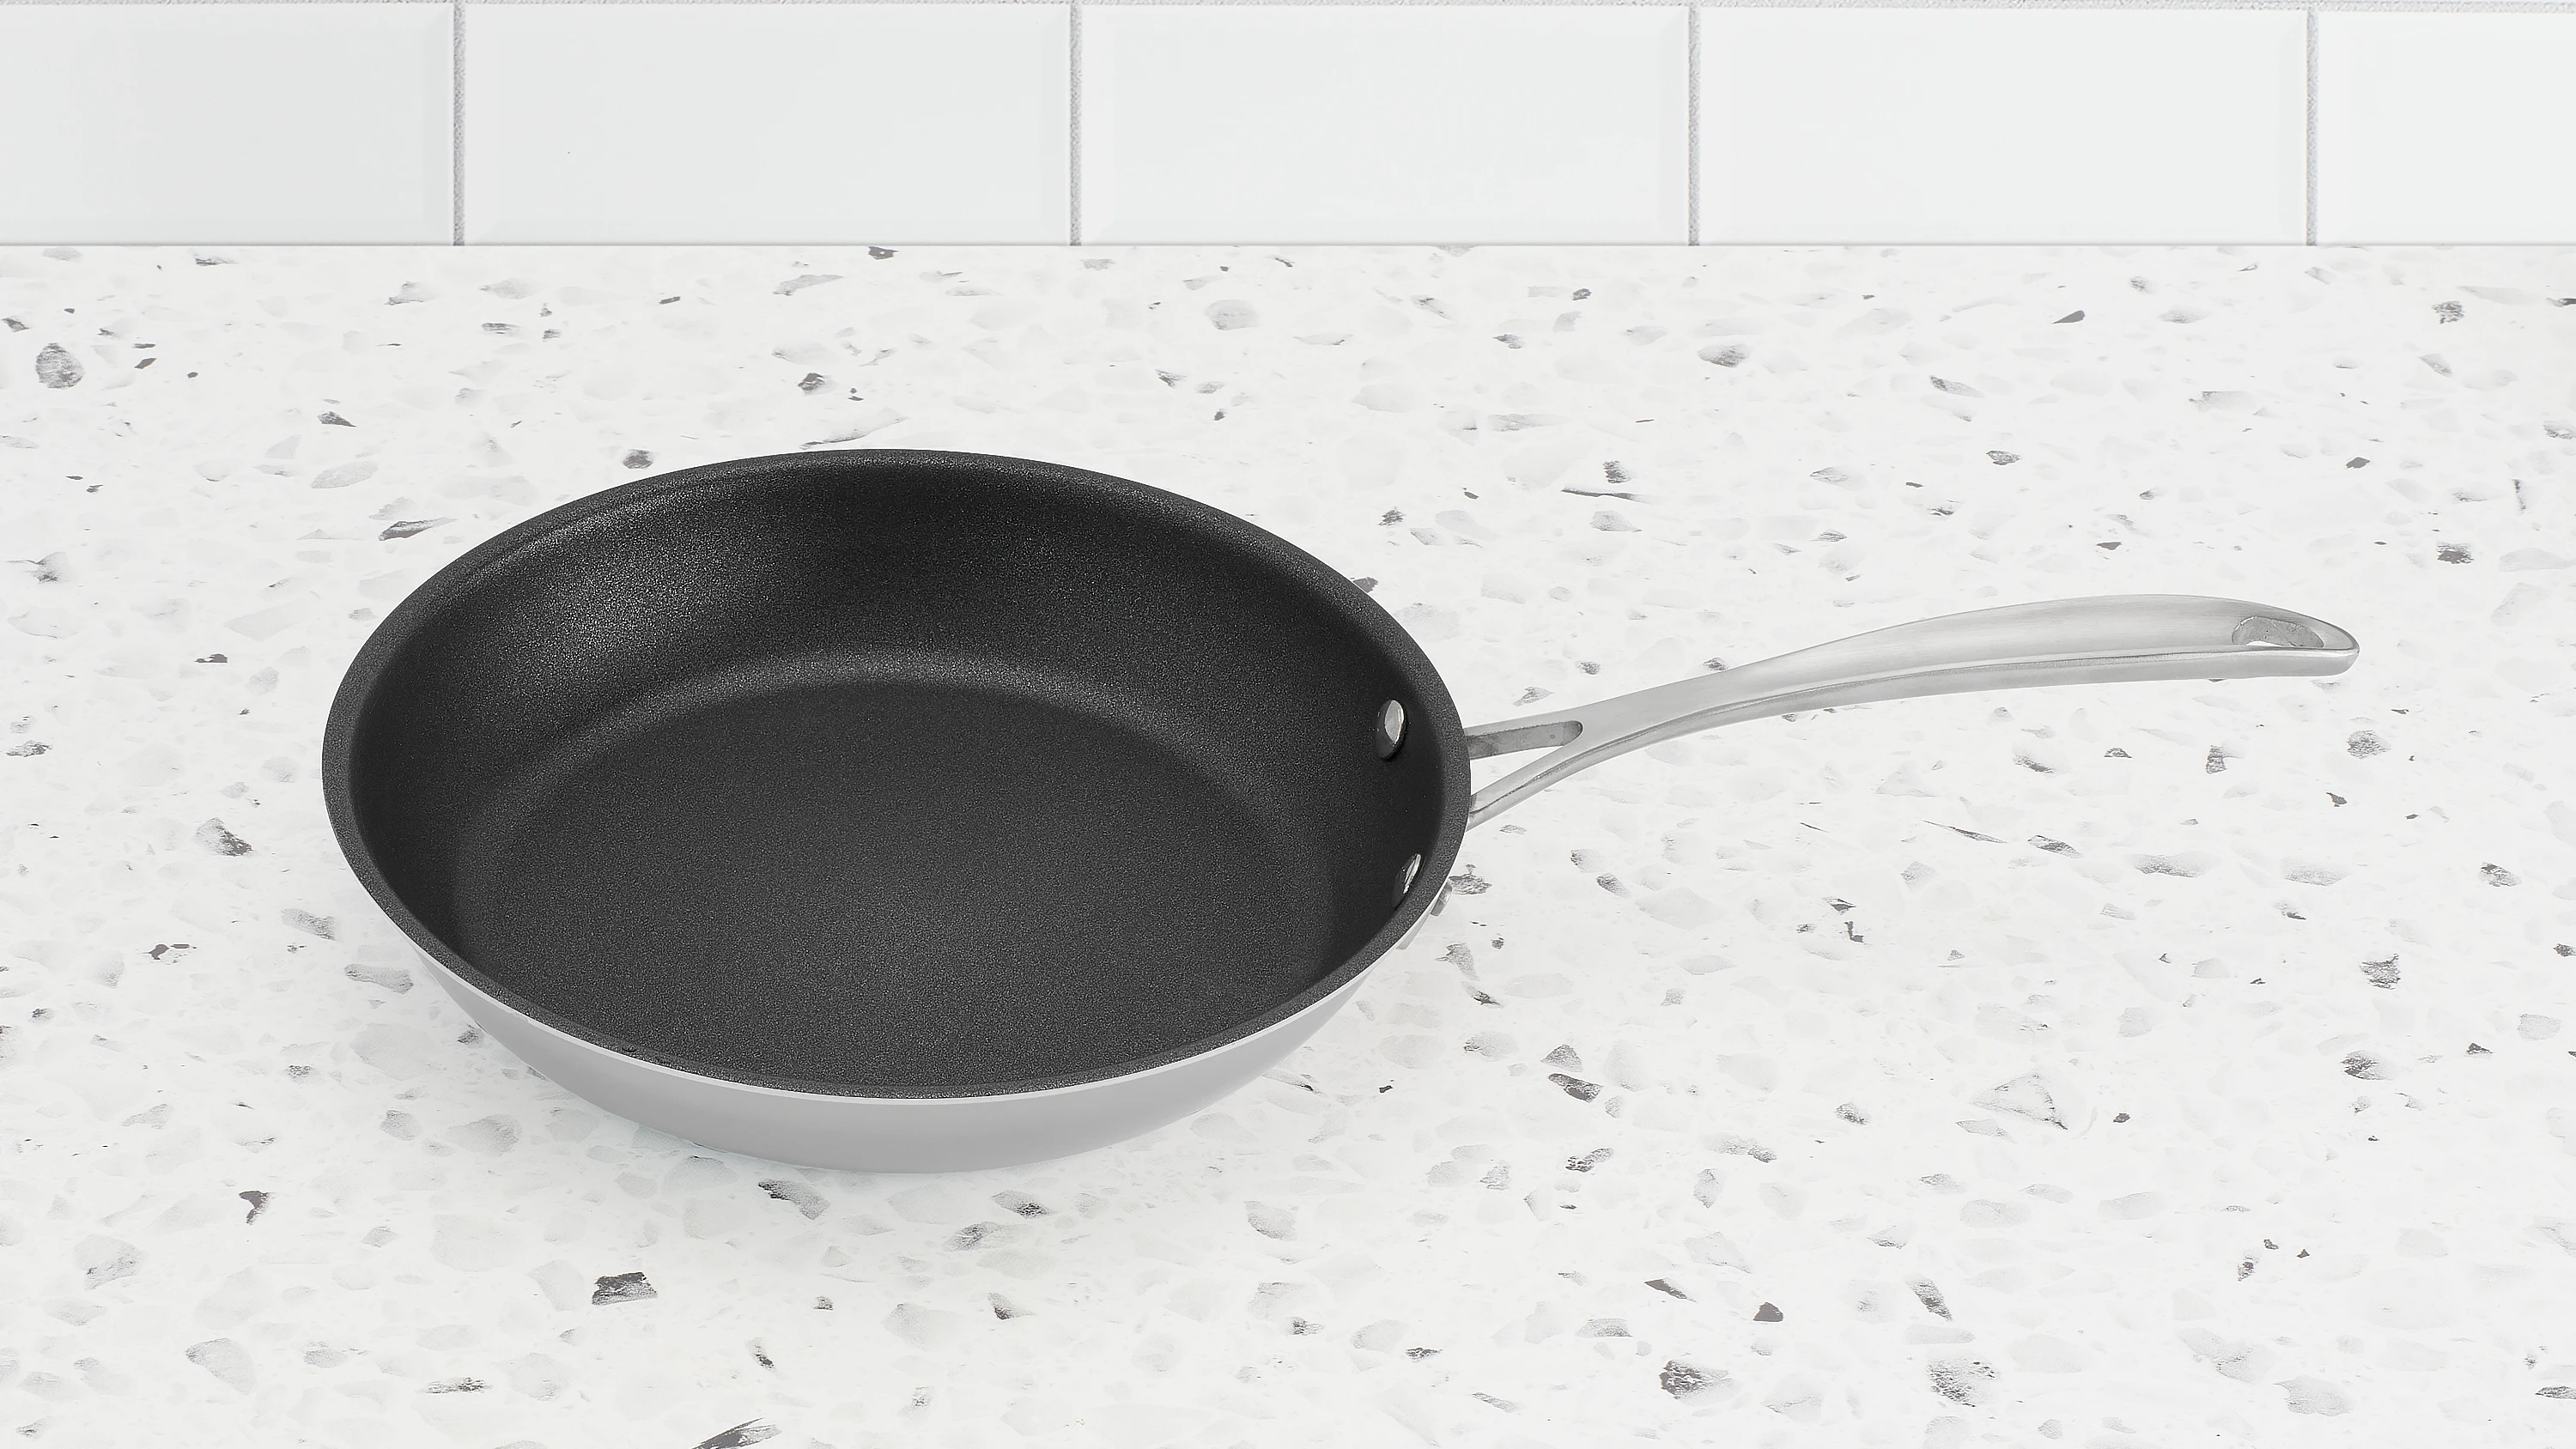 American Kitchen Cookware